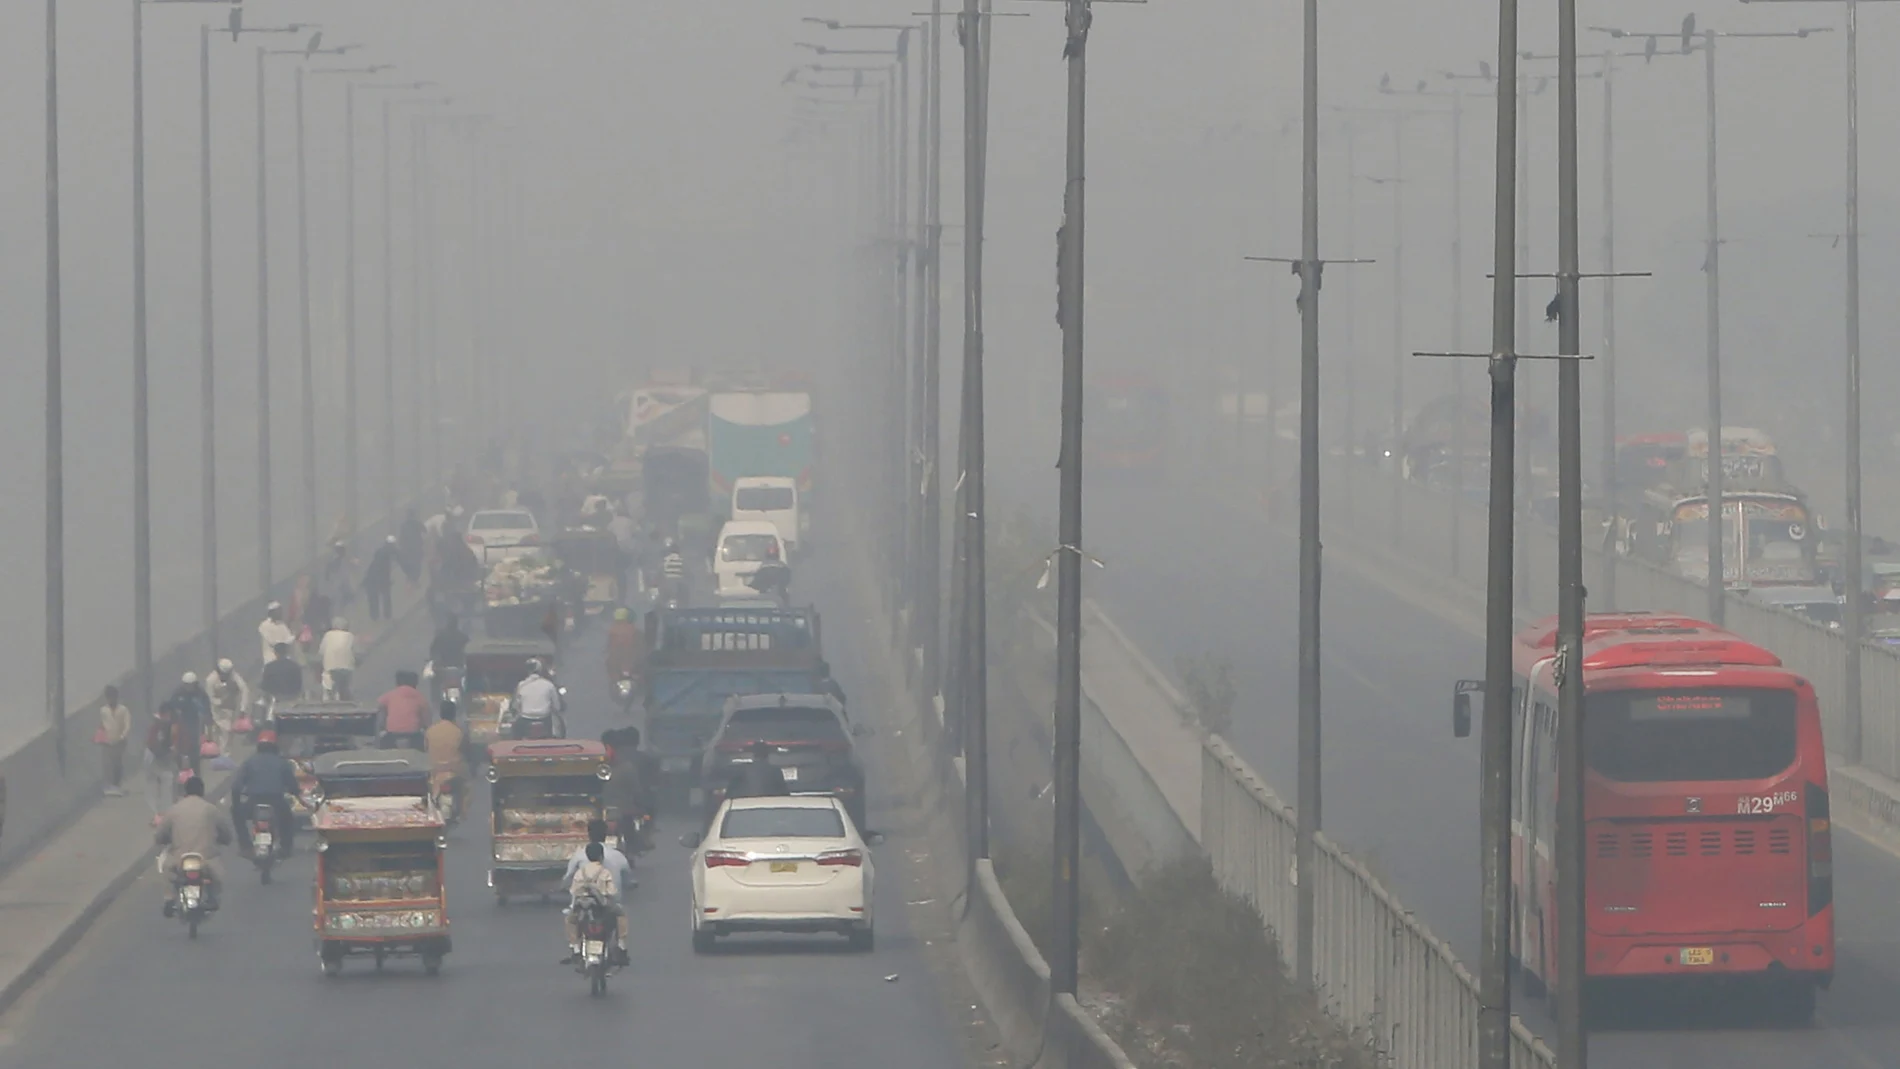 FILE - In this Wednesday, Nov. 11, 2020 file photo, vehicles drive on a highway as smog envelops the area of Lahore, Pakistan. The World Health Organization said Wednesday Sept. 22, 2021, the negative health impacts of poor air quality kick in at lower levels than it previously thought, announcing revisions to its guidelines on air quality that set a higher bar for policymakers in a world where 90 percent of people already live in areas with one particularly harmful type of pollutant. (AP Photo/K.M. Chaudary, File)